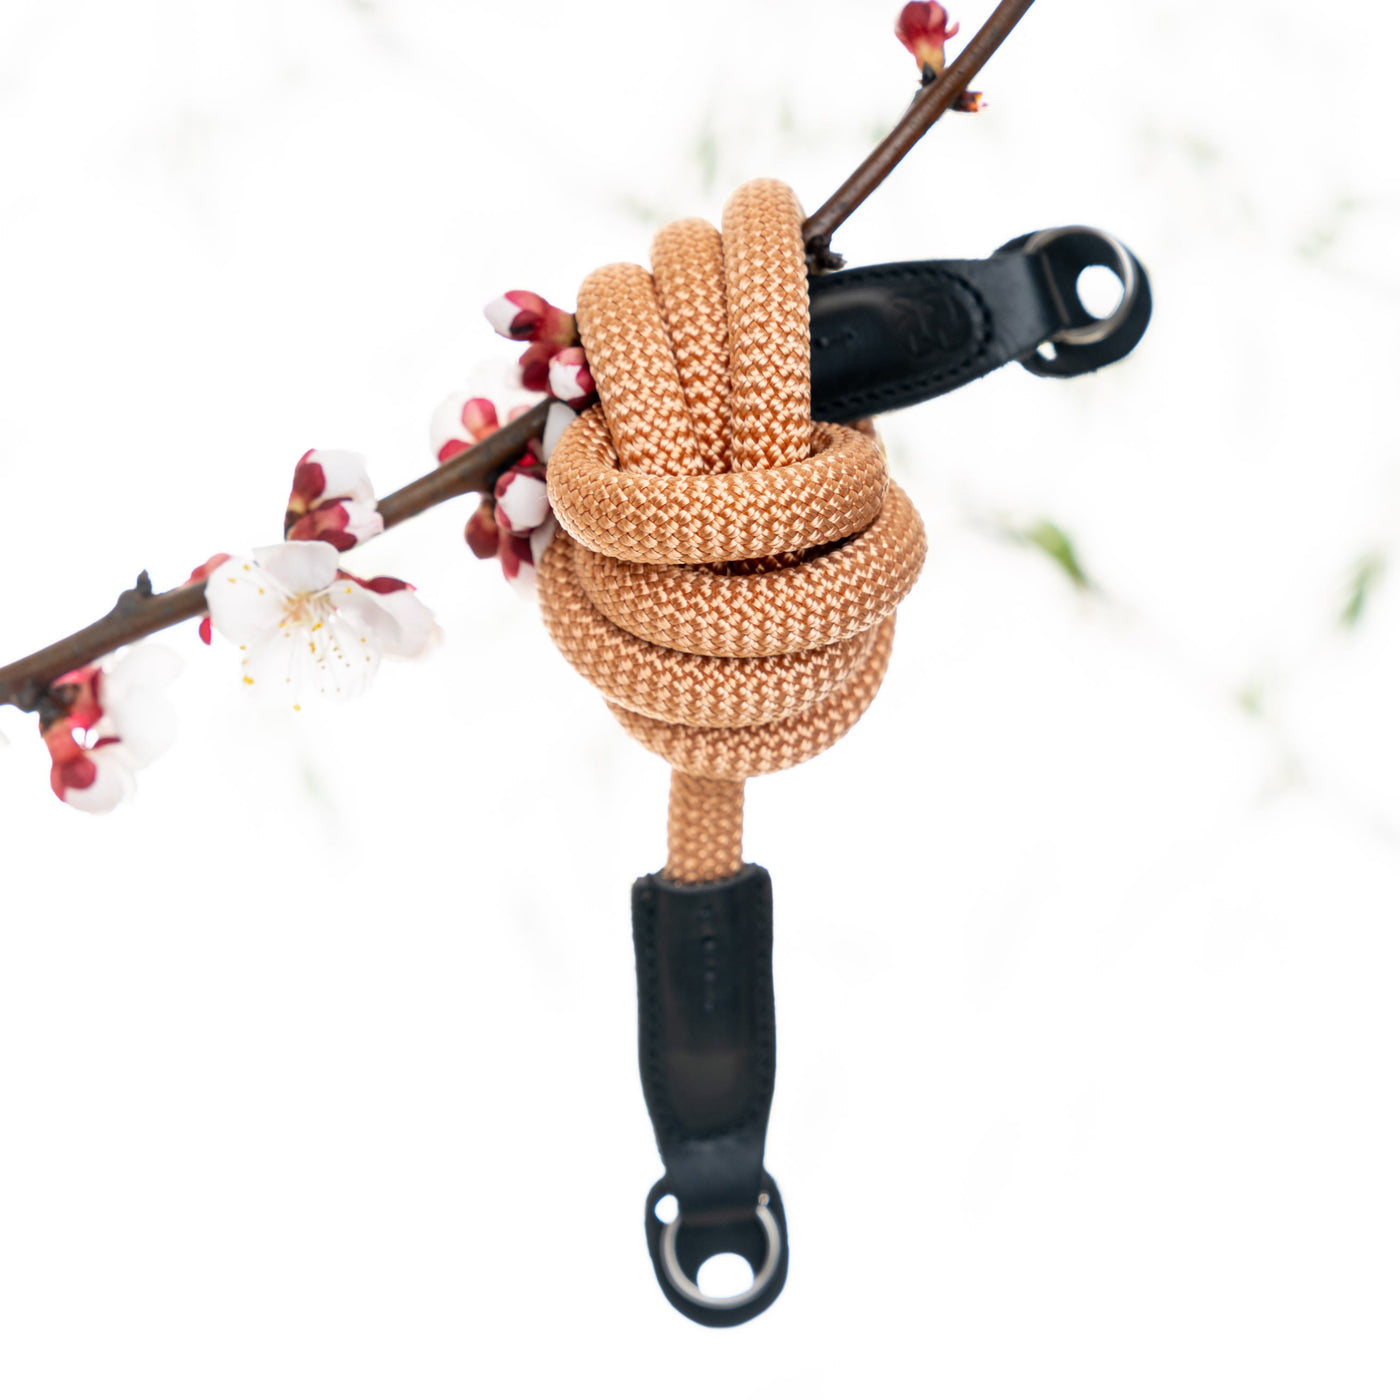 Peach Rope Strap arranged in a knot around a branch with cherry blossom 